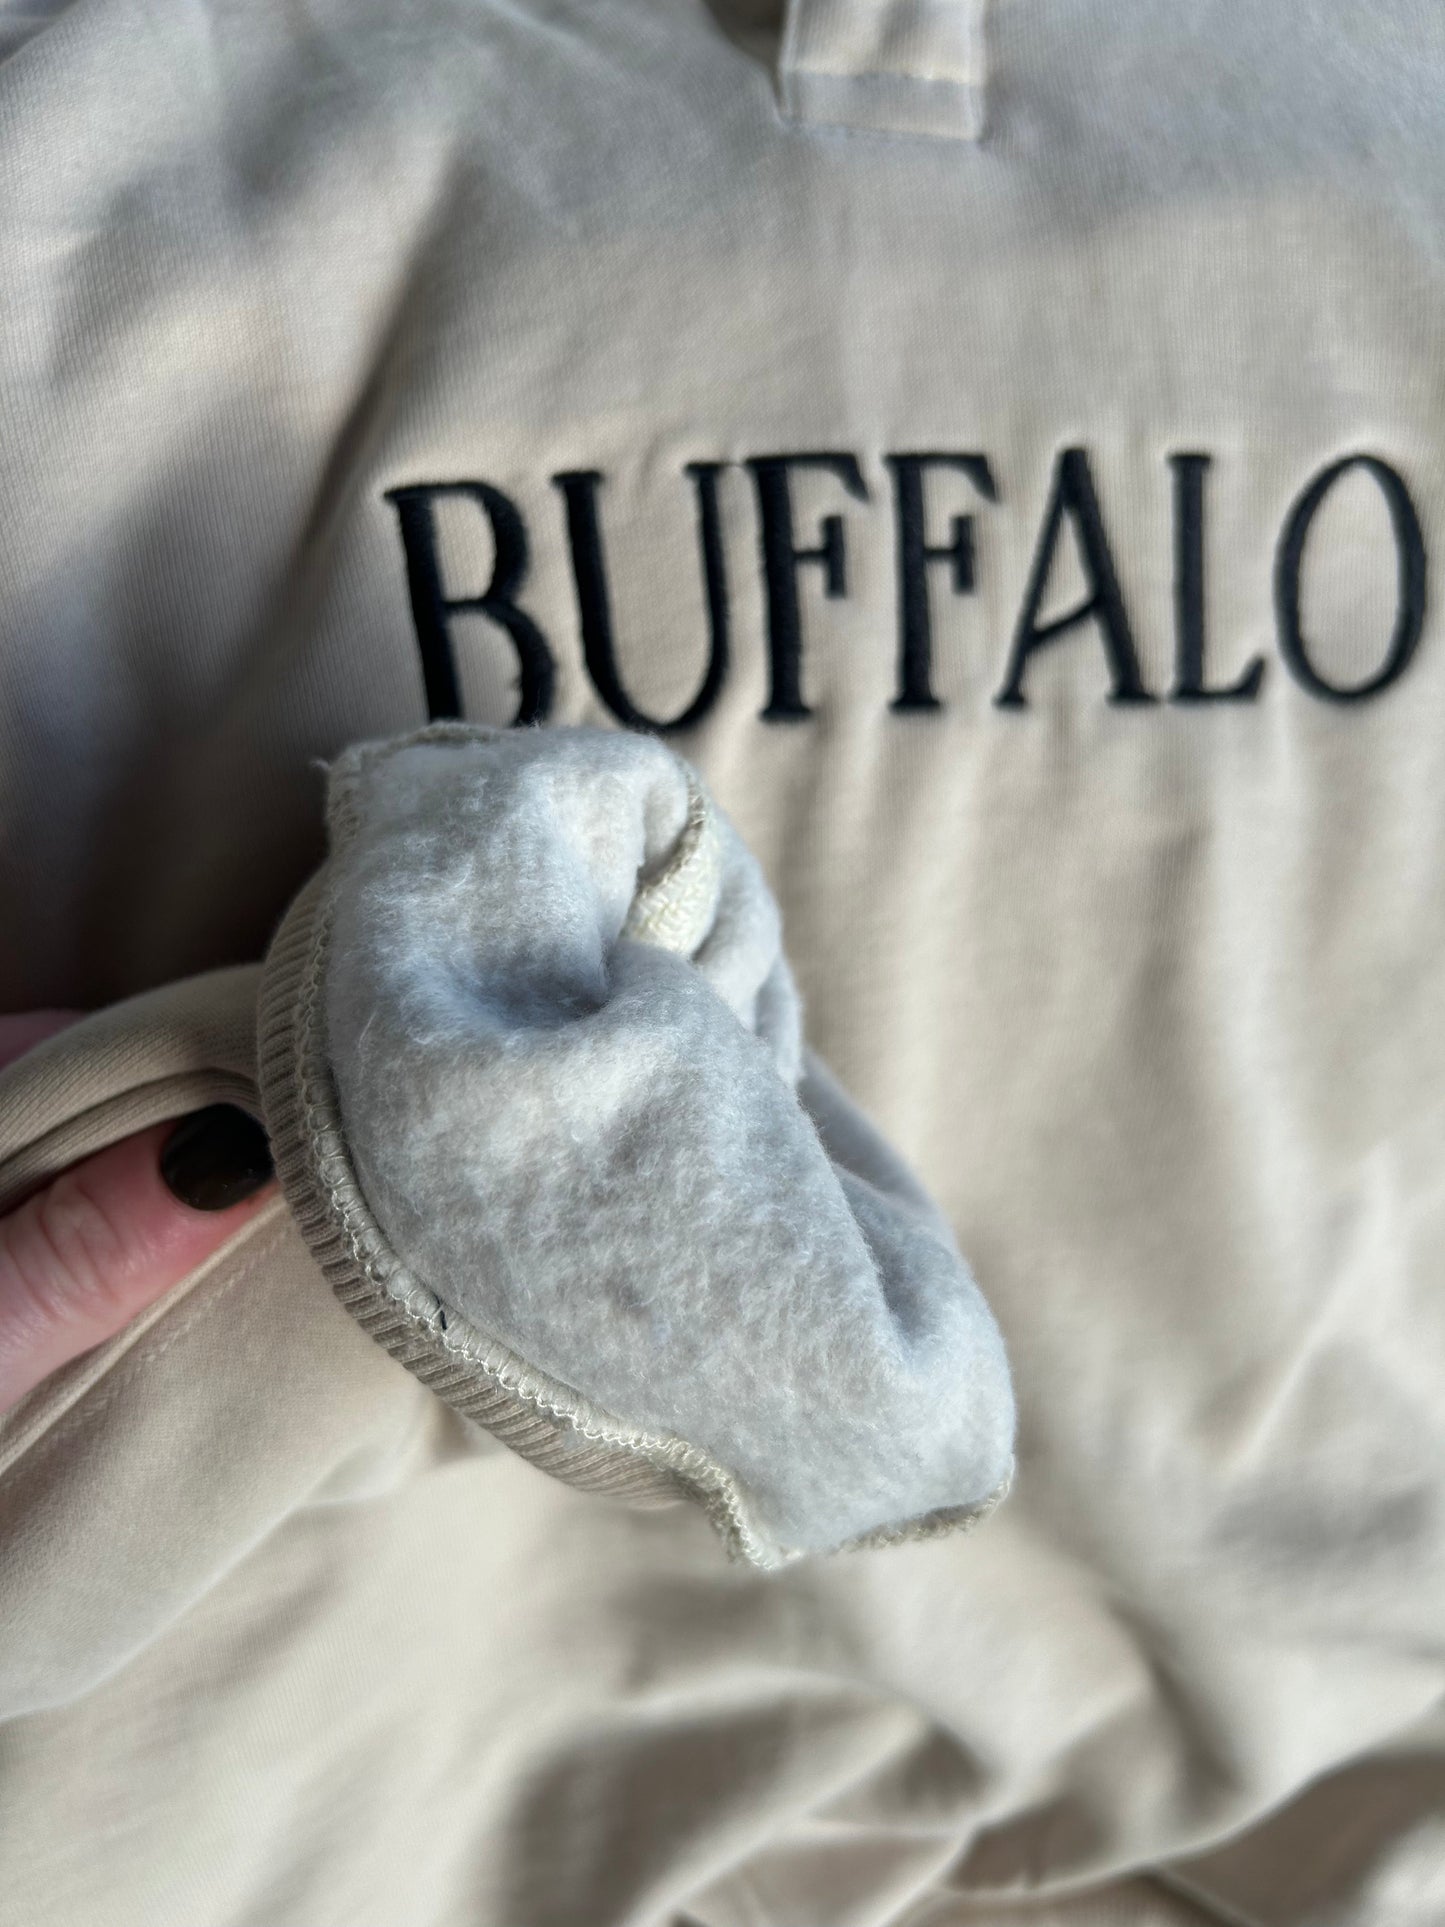 A Tribute to Buffalo Hoodie PREORDER